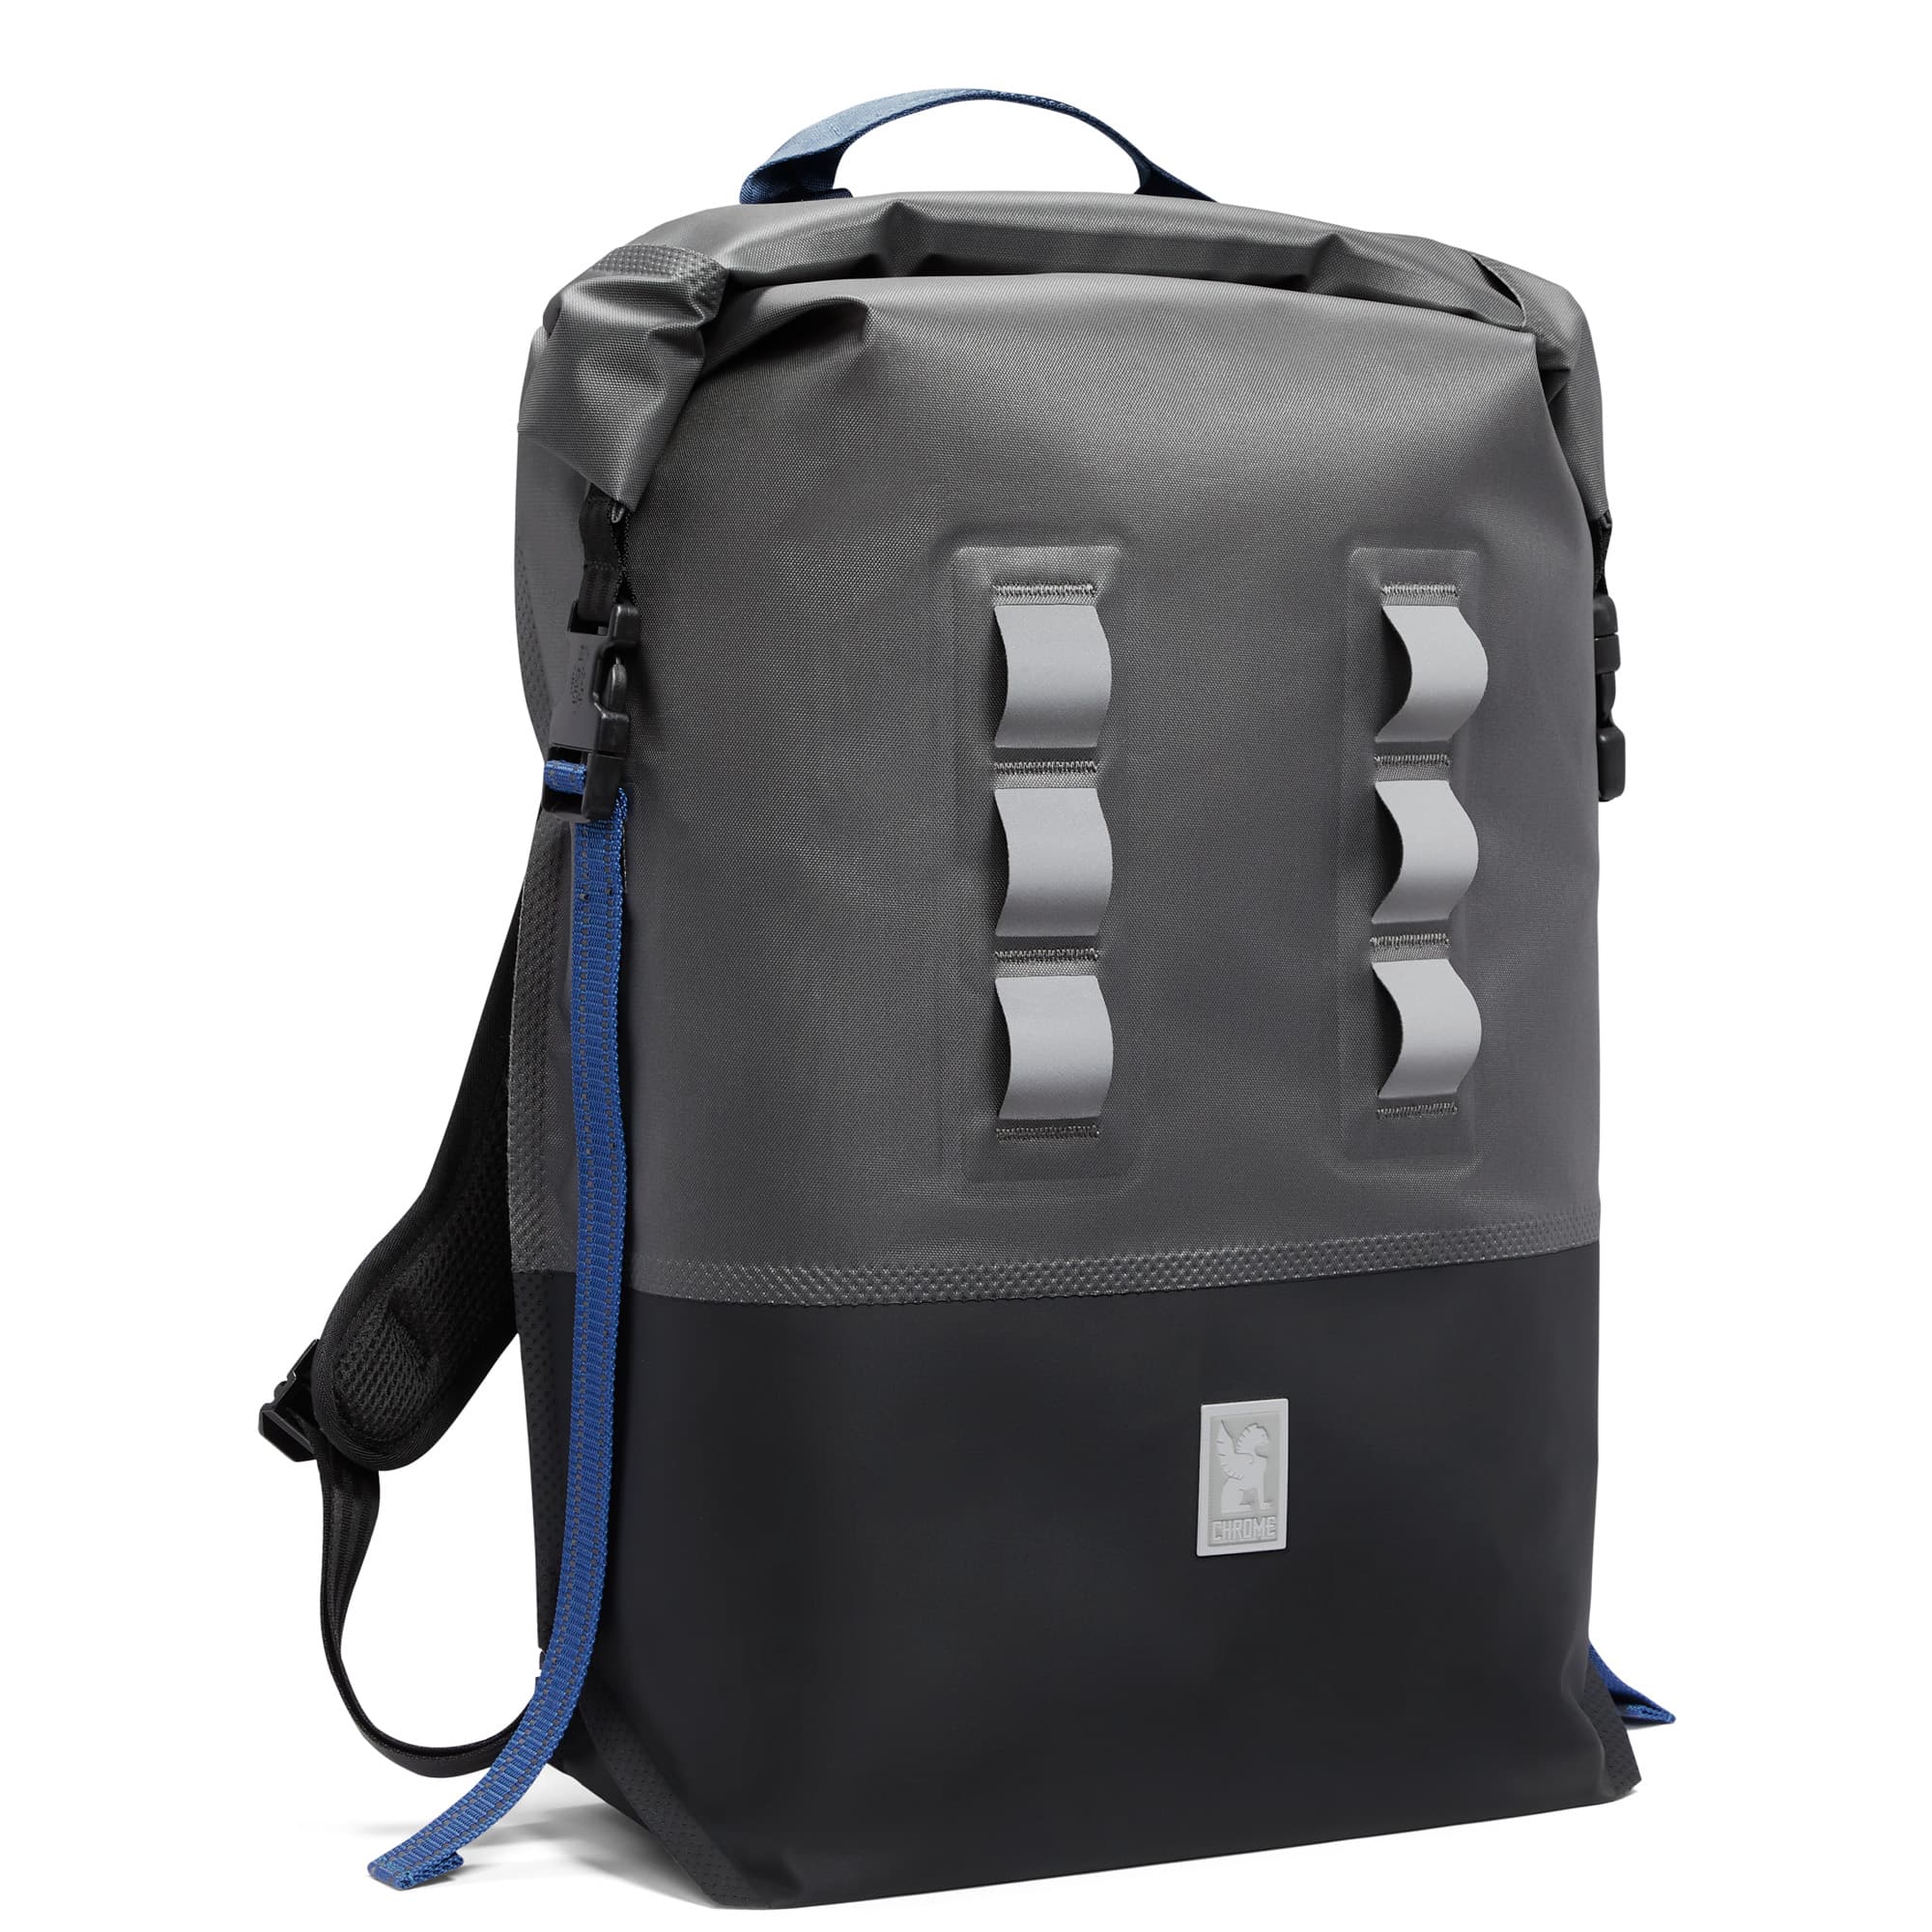 Waterproof 30L highly reflective backpack in grey #color_fog